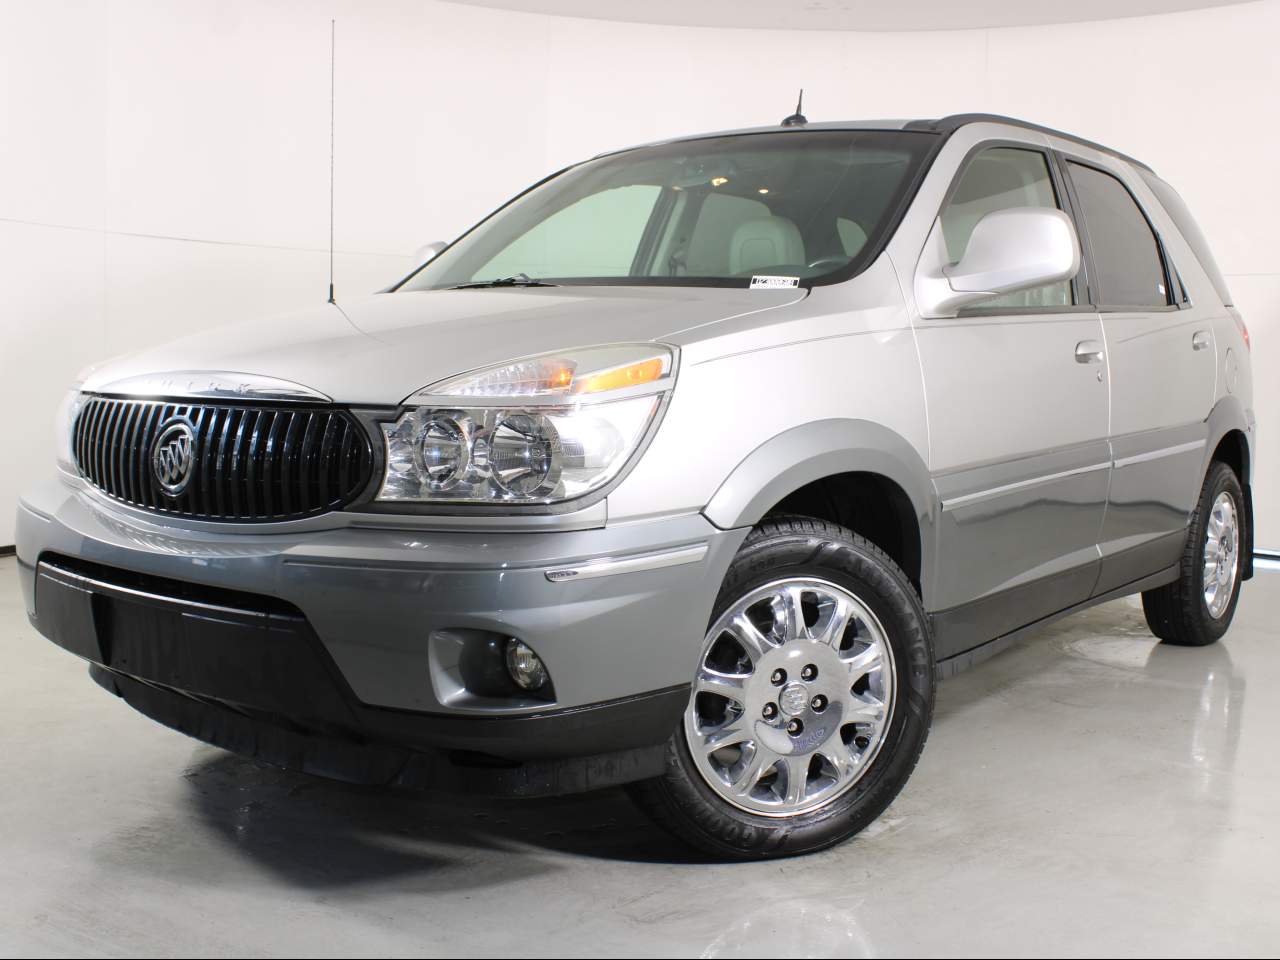 Pre-Owned 2006 Buick Rendezvous - D2300060B | Mercedes-Benz of Tucson